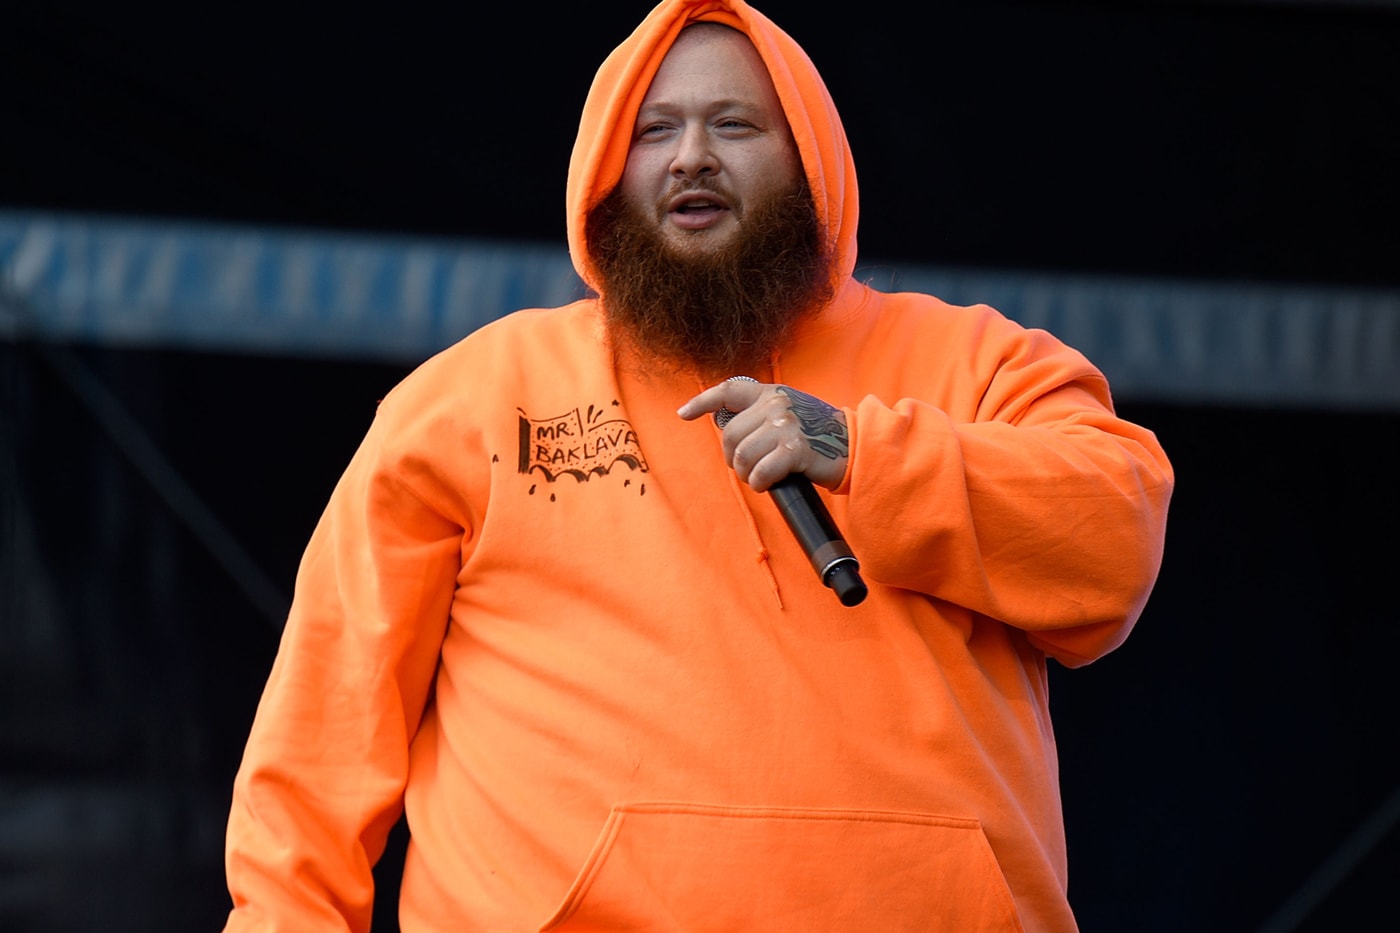 Watch Episode One of Action Bronson's 'Fuck, That's Delicious'